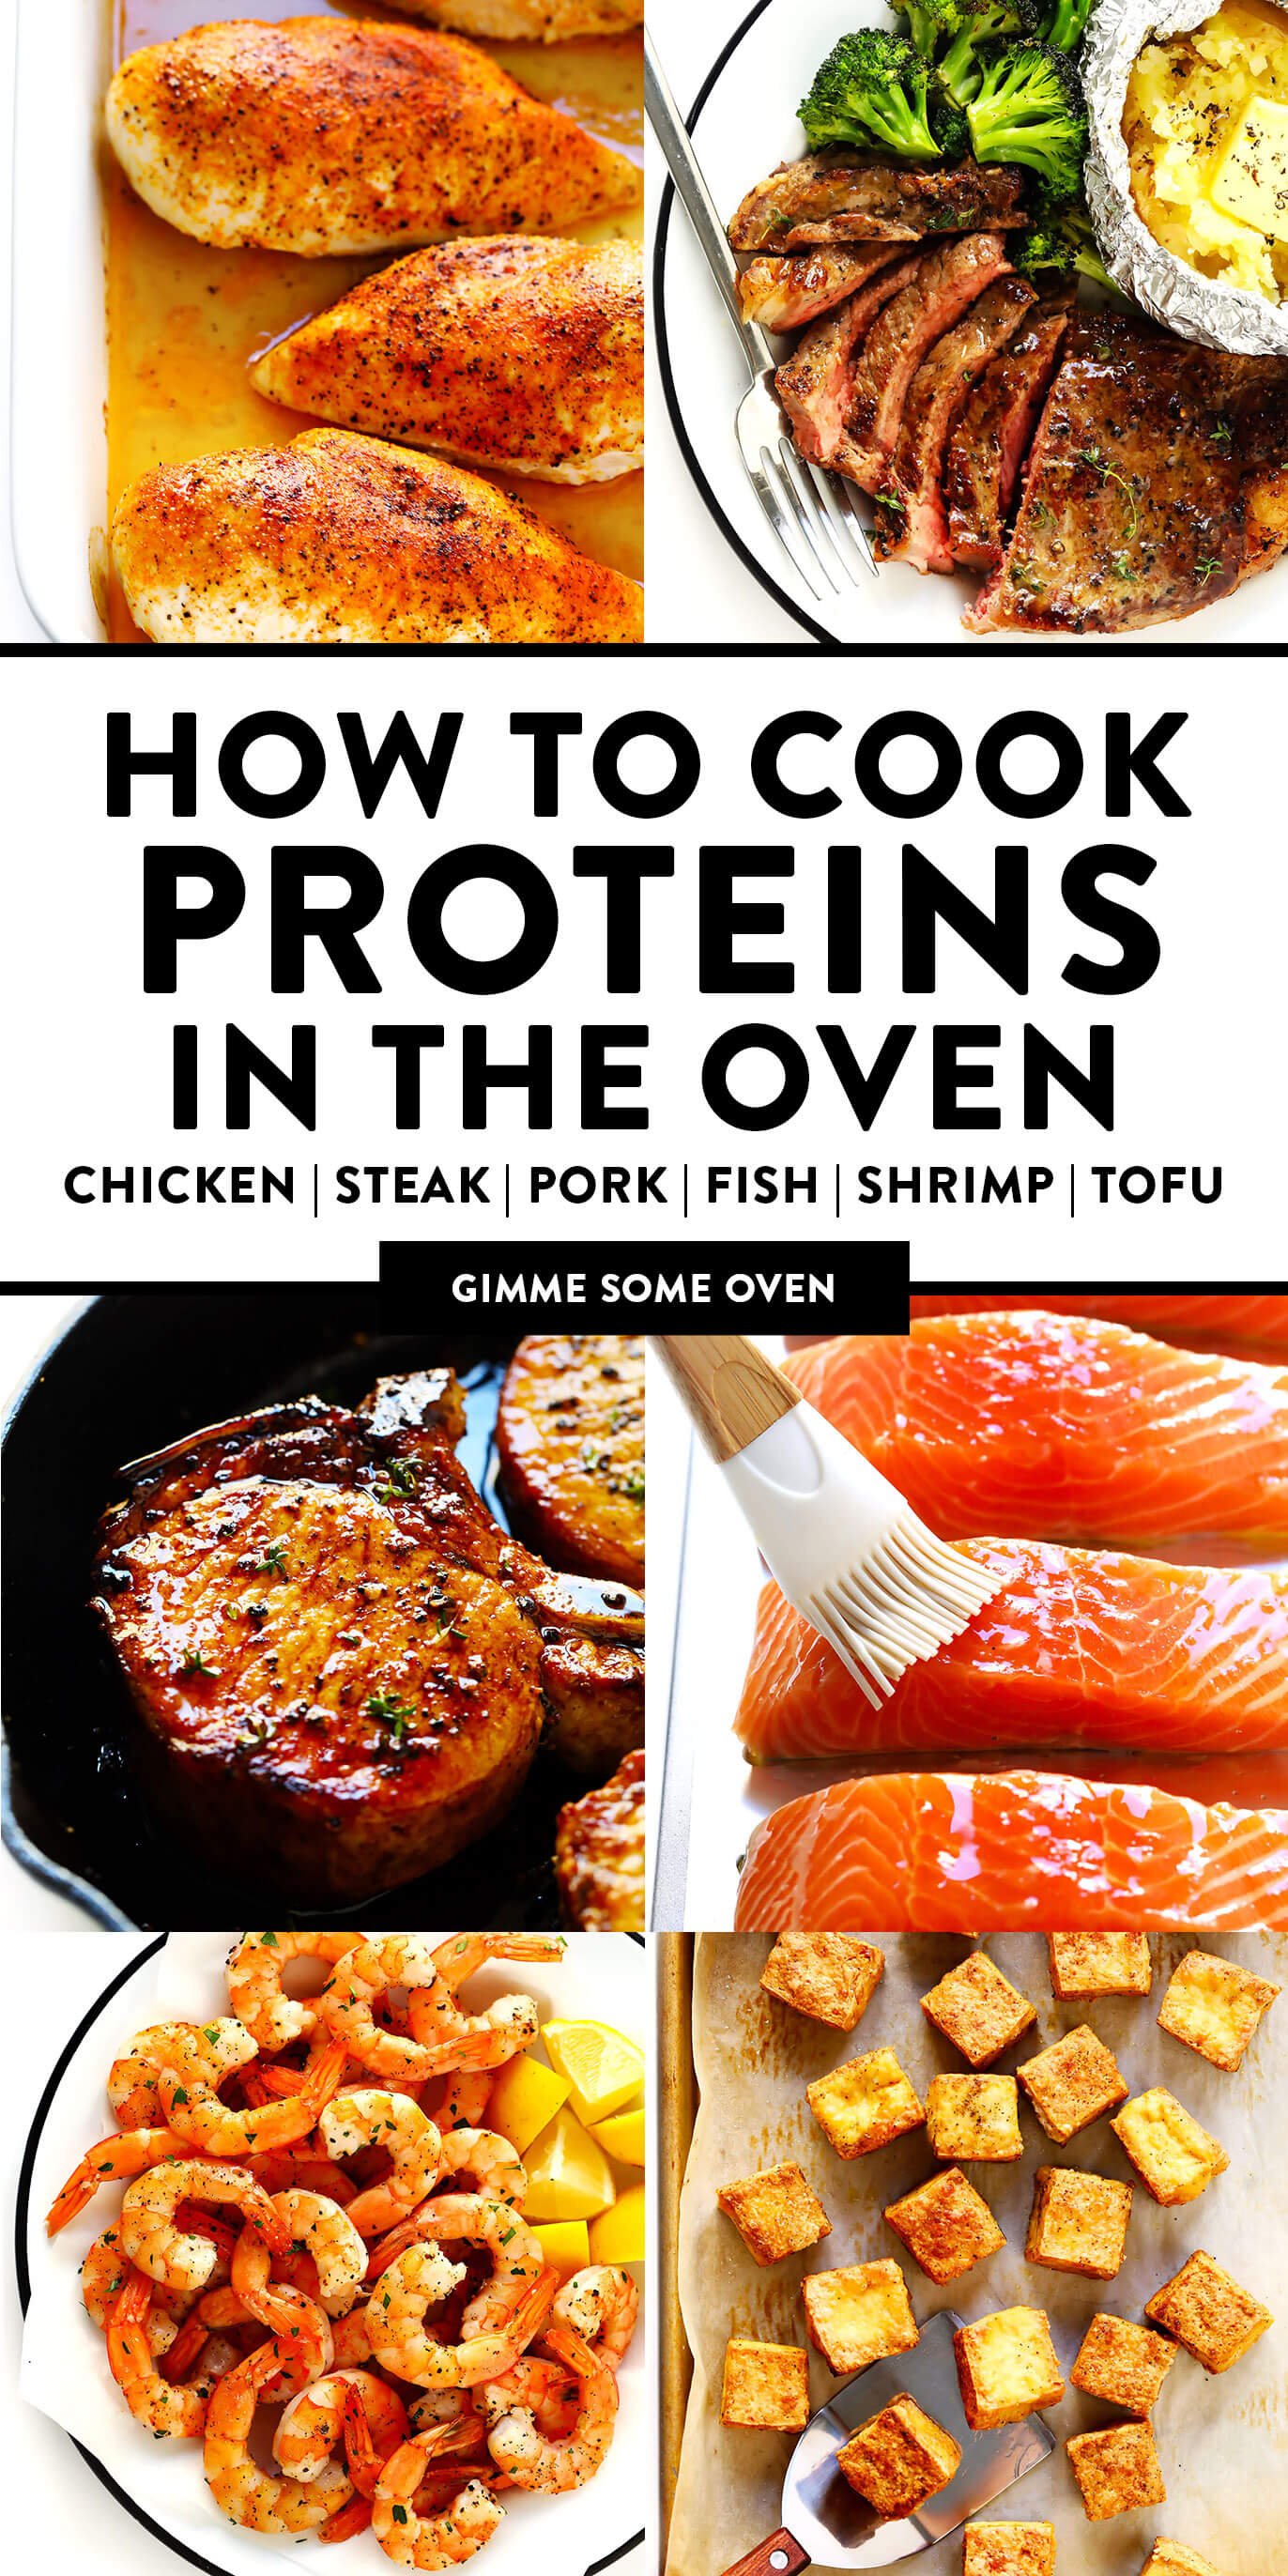 How To Cook Chicken, Steak, Pork, Fish, Shrimp and Tofu In The Oven